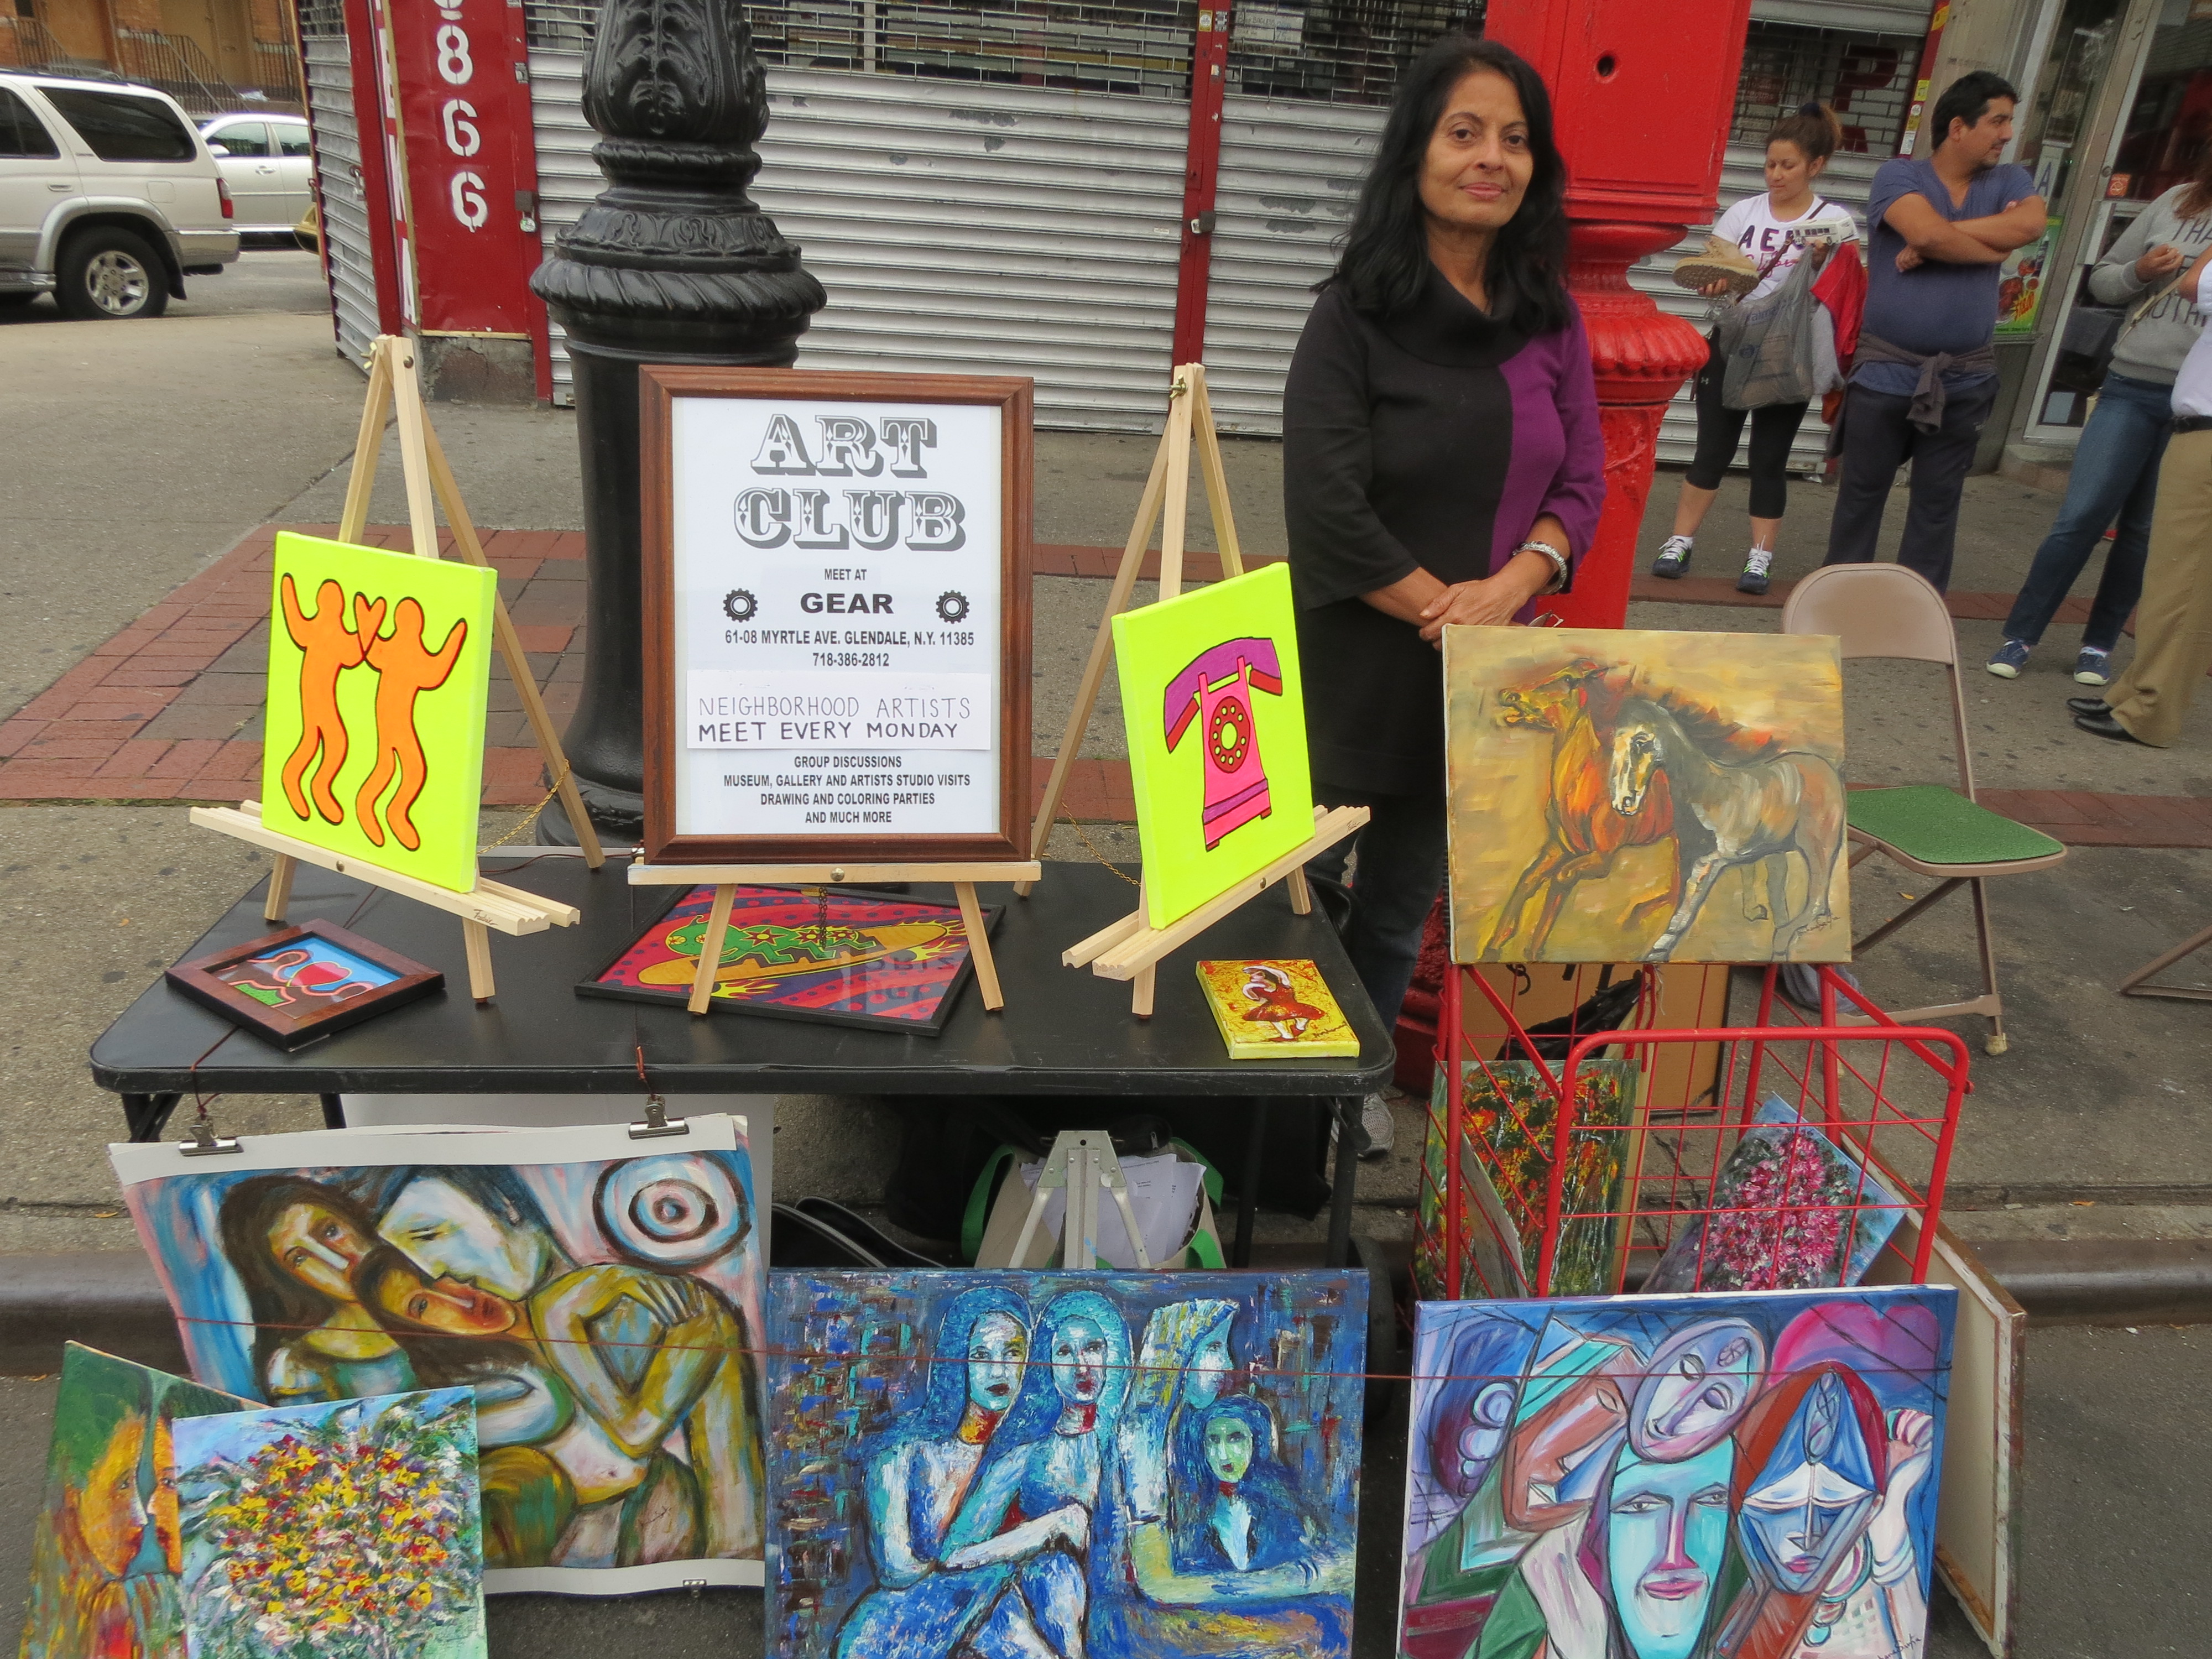 Artist Archana Santra displayed some of her artwork at the festival. Santra, who has shown her work around the globe - from India to Queens - is a member of the Art Club in Glendale. The club, which is free and open to anyone interested, is held each Monday from 6 p.m. to 9 p.m. at Gear, located at 61-08 Myrtle Avenue in Glendale.